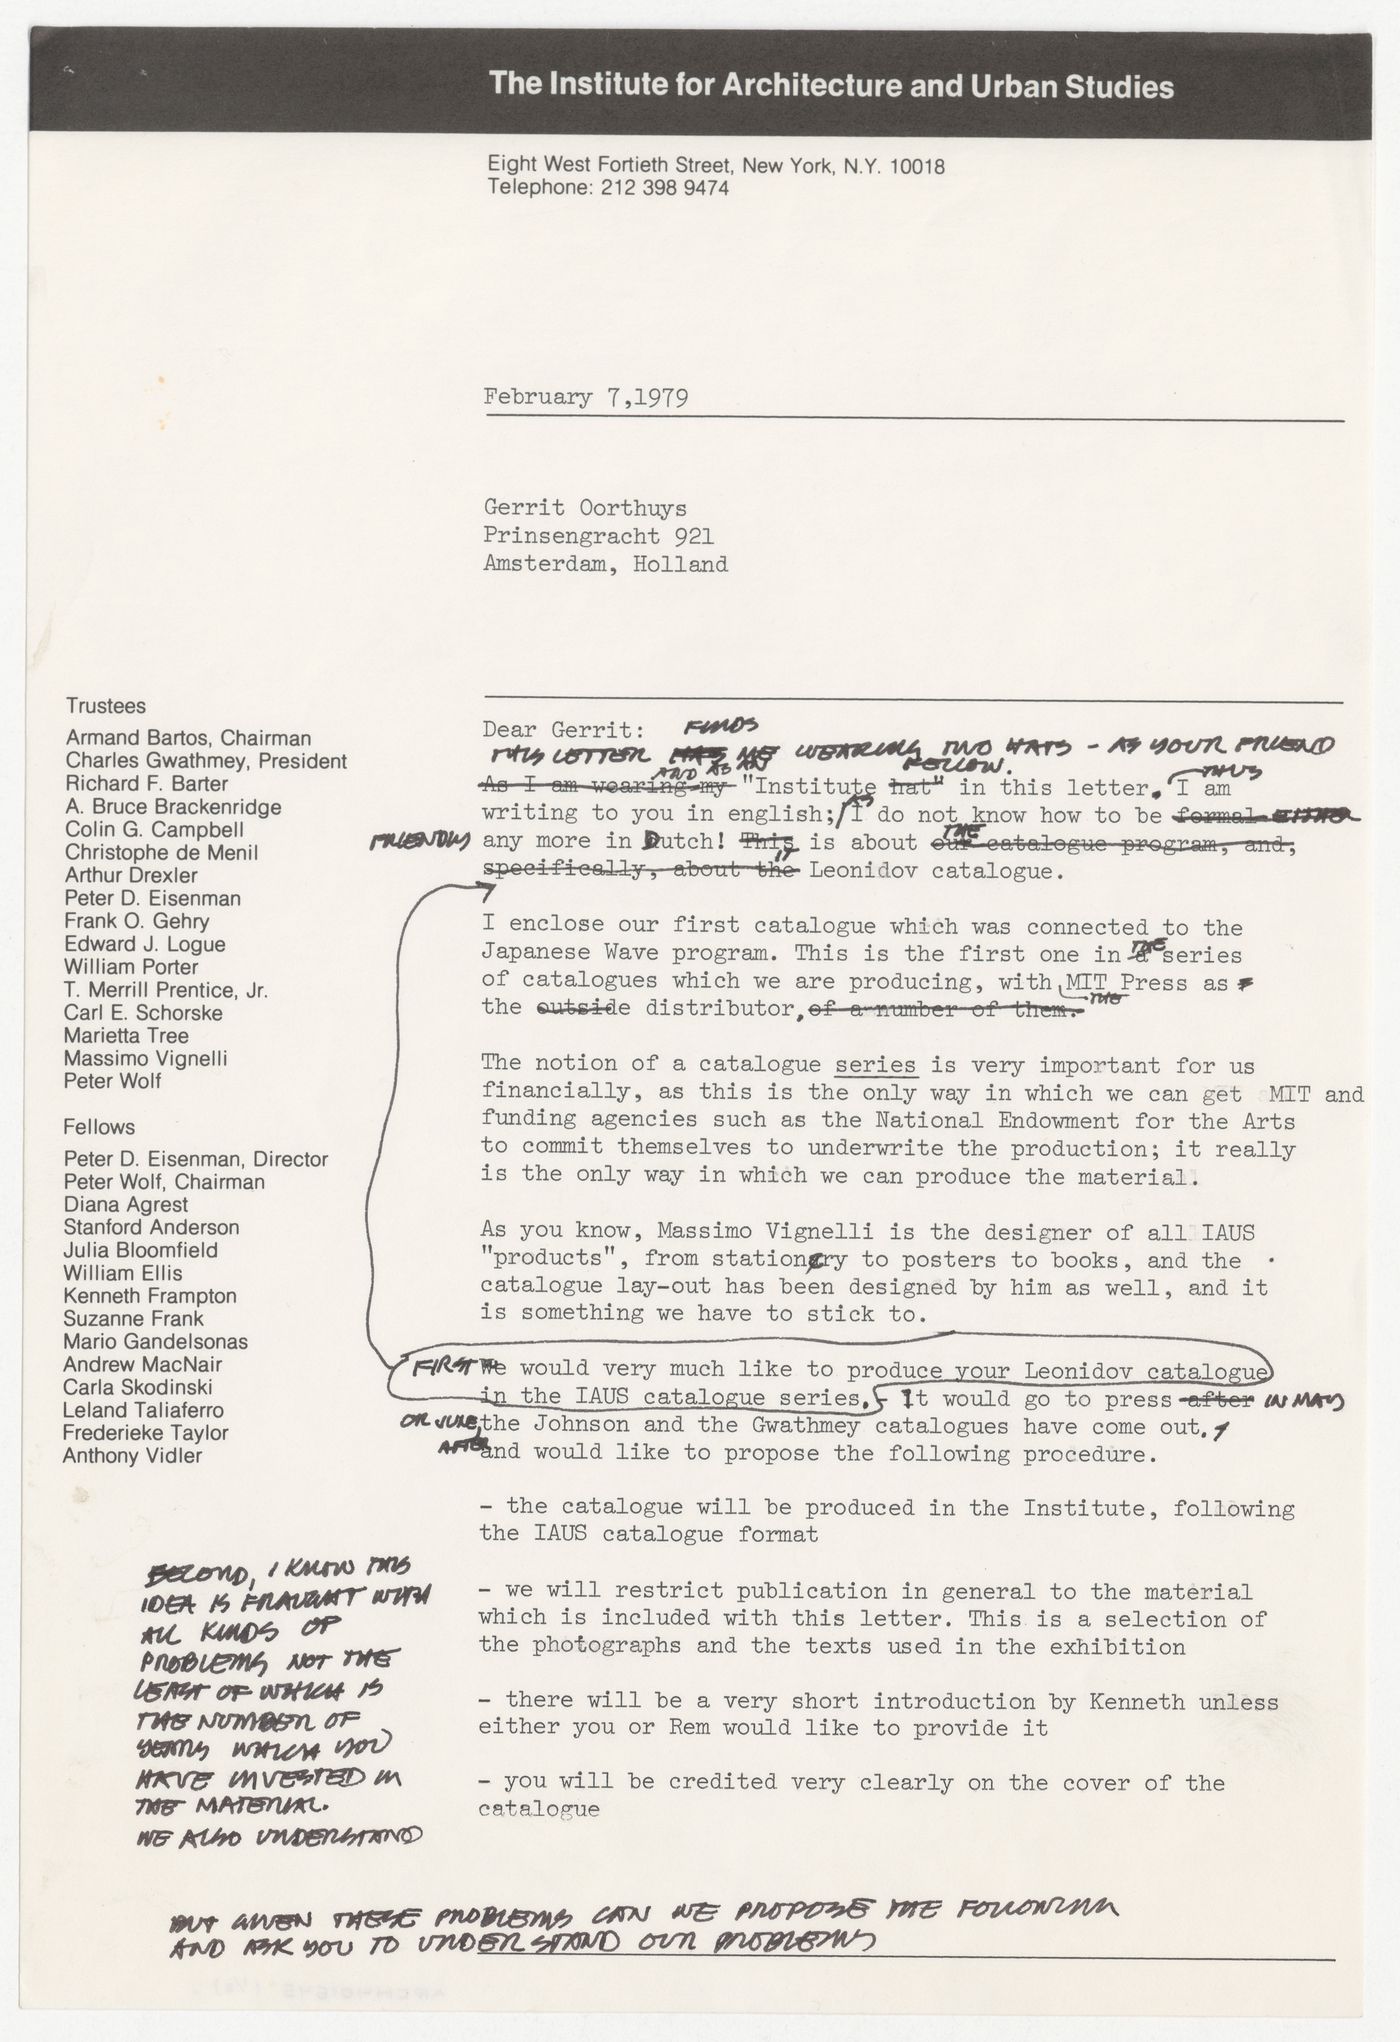 Draft letter from Peter D. Eisenman to Guerrit Oorthuys about exhibition catalogues with annotations by Peter D. Eisenman